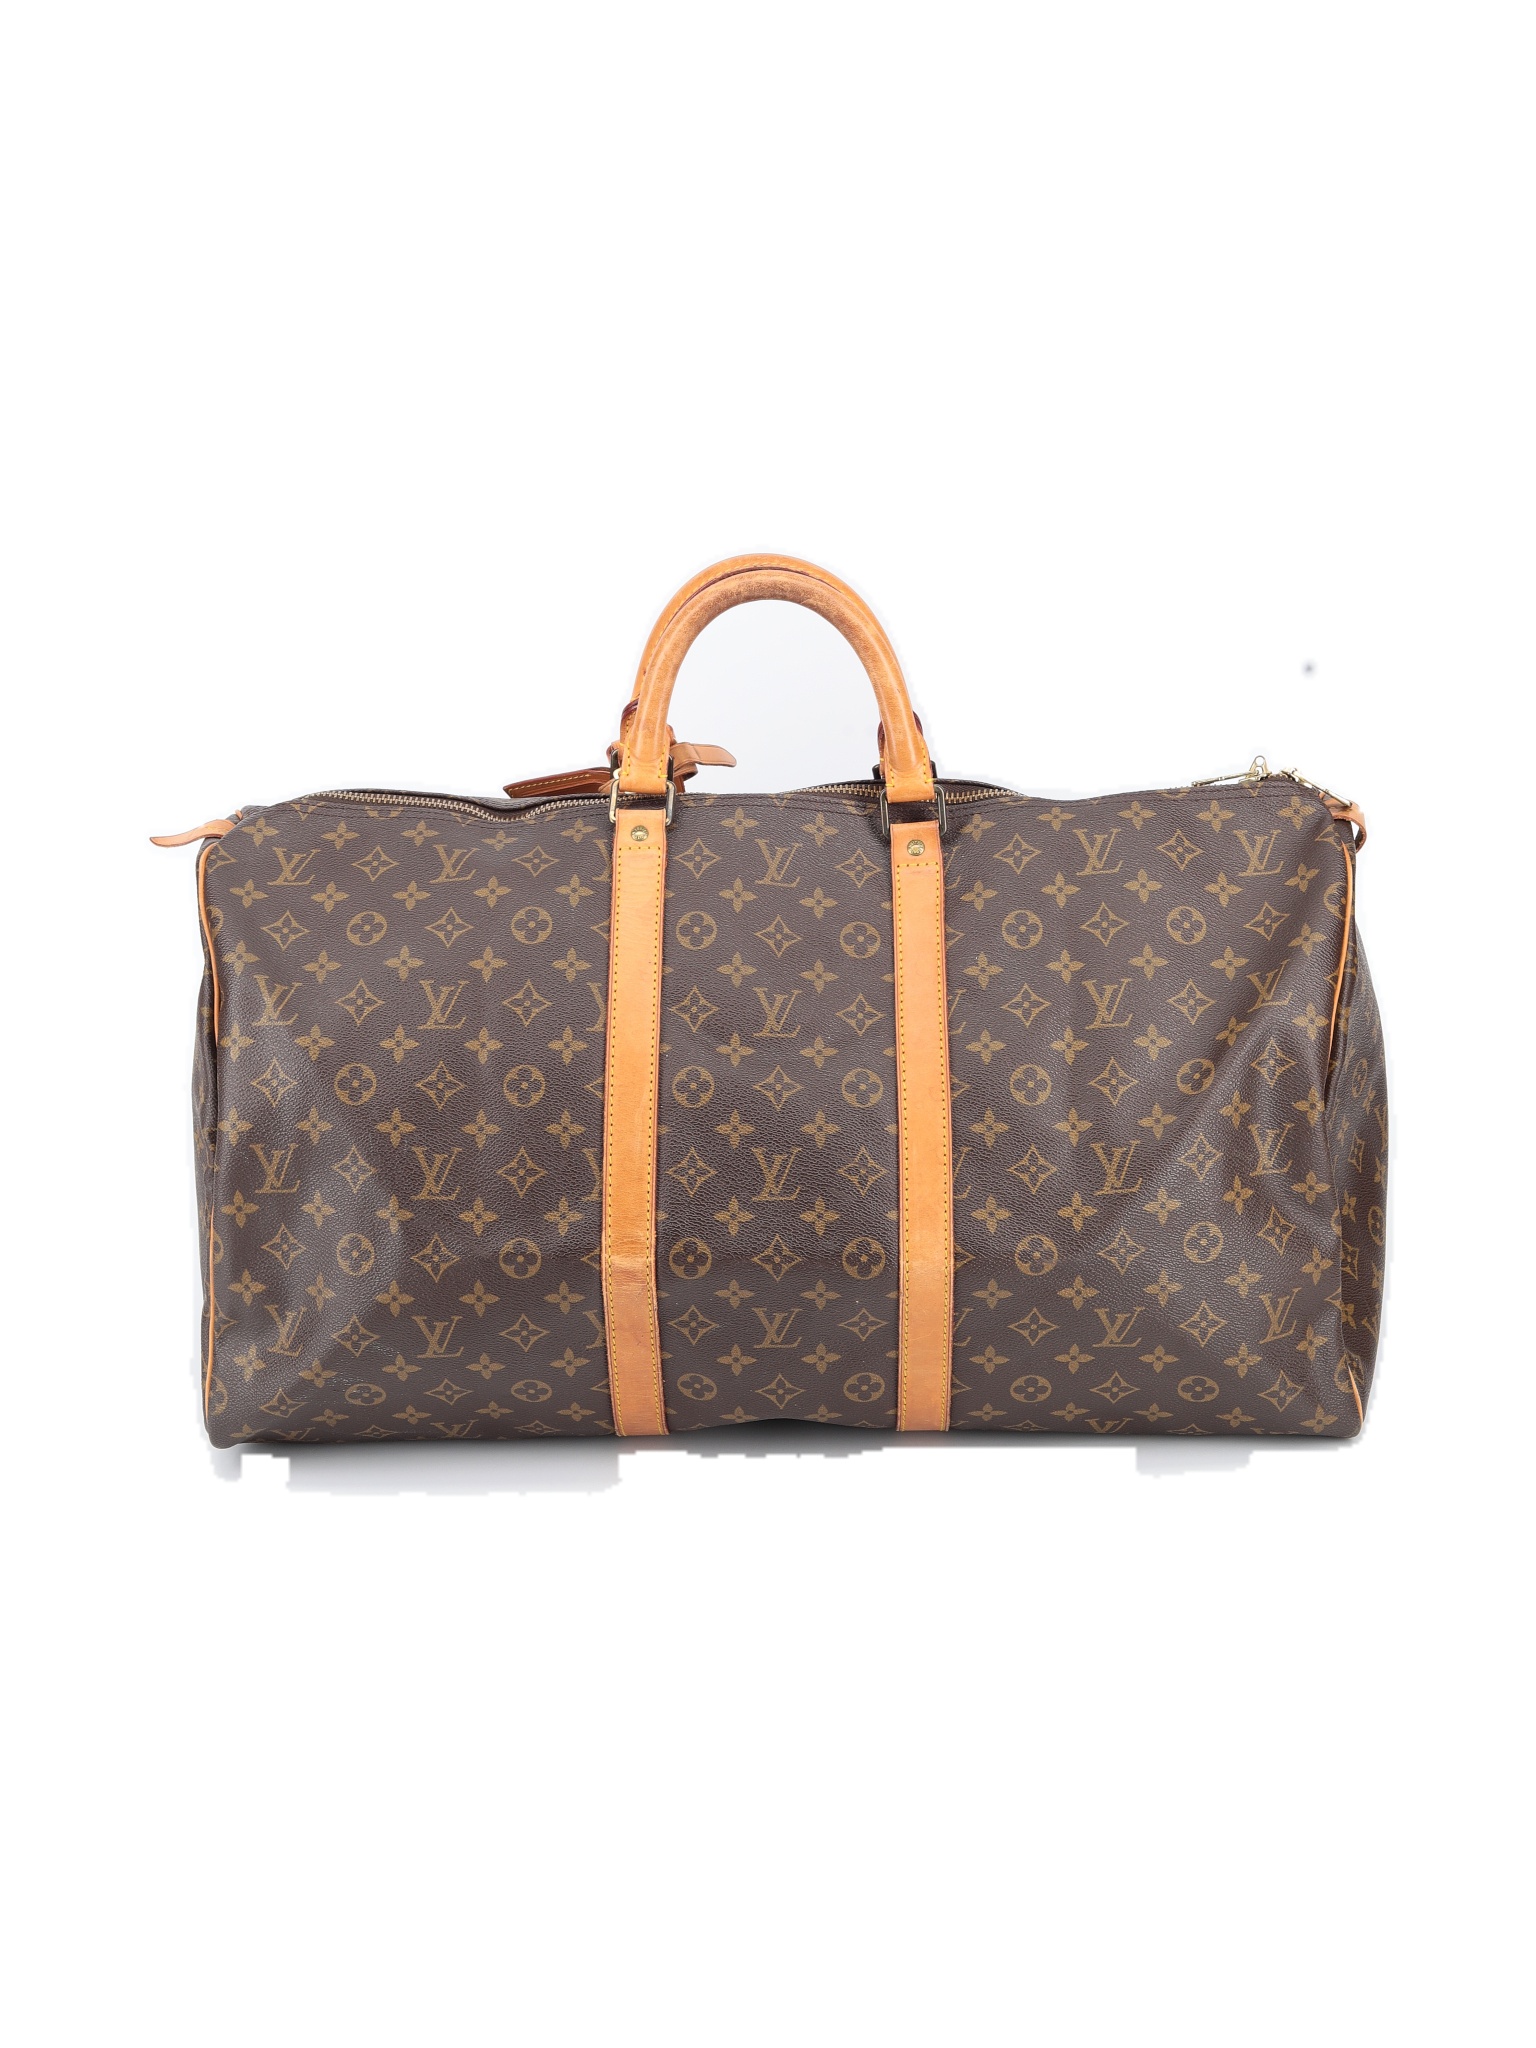 Louis Vuitton 100% Coated Canvas Color Block Colored Brown Vintage Monogram Keepall  55 Weekender Bag One Size - 67% off